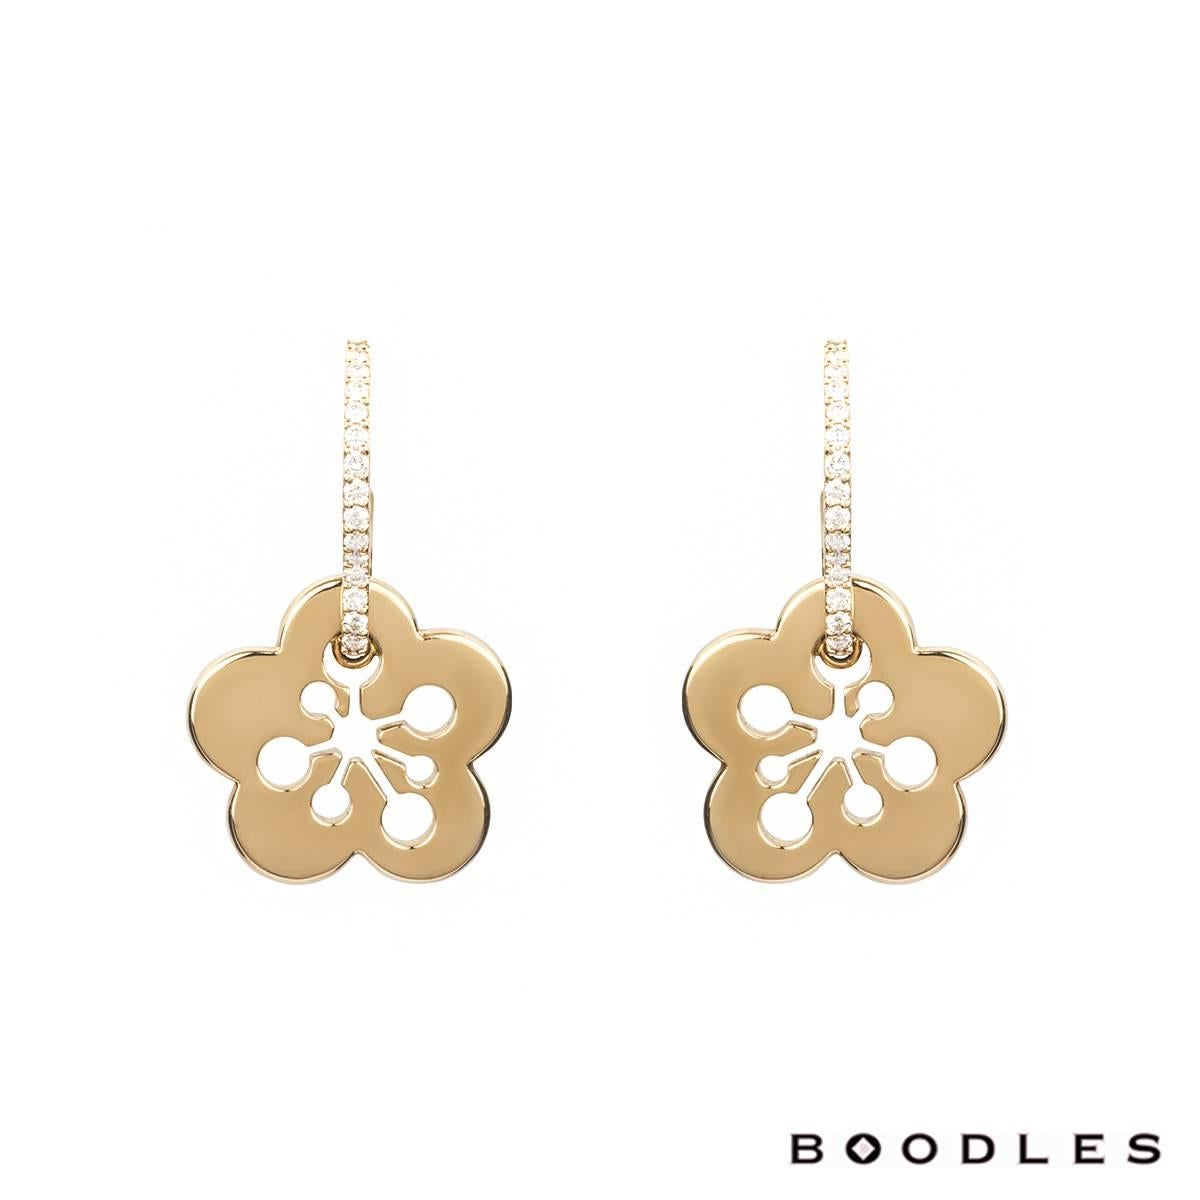 A stunning pair of 18k rose gold diamond set earrings from the Blossom collection by Boodles. The earrings are set in an open work half floral design, which is pave set with round brilliant cut diamonds totalling 0.25ct and suspended from this is a